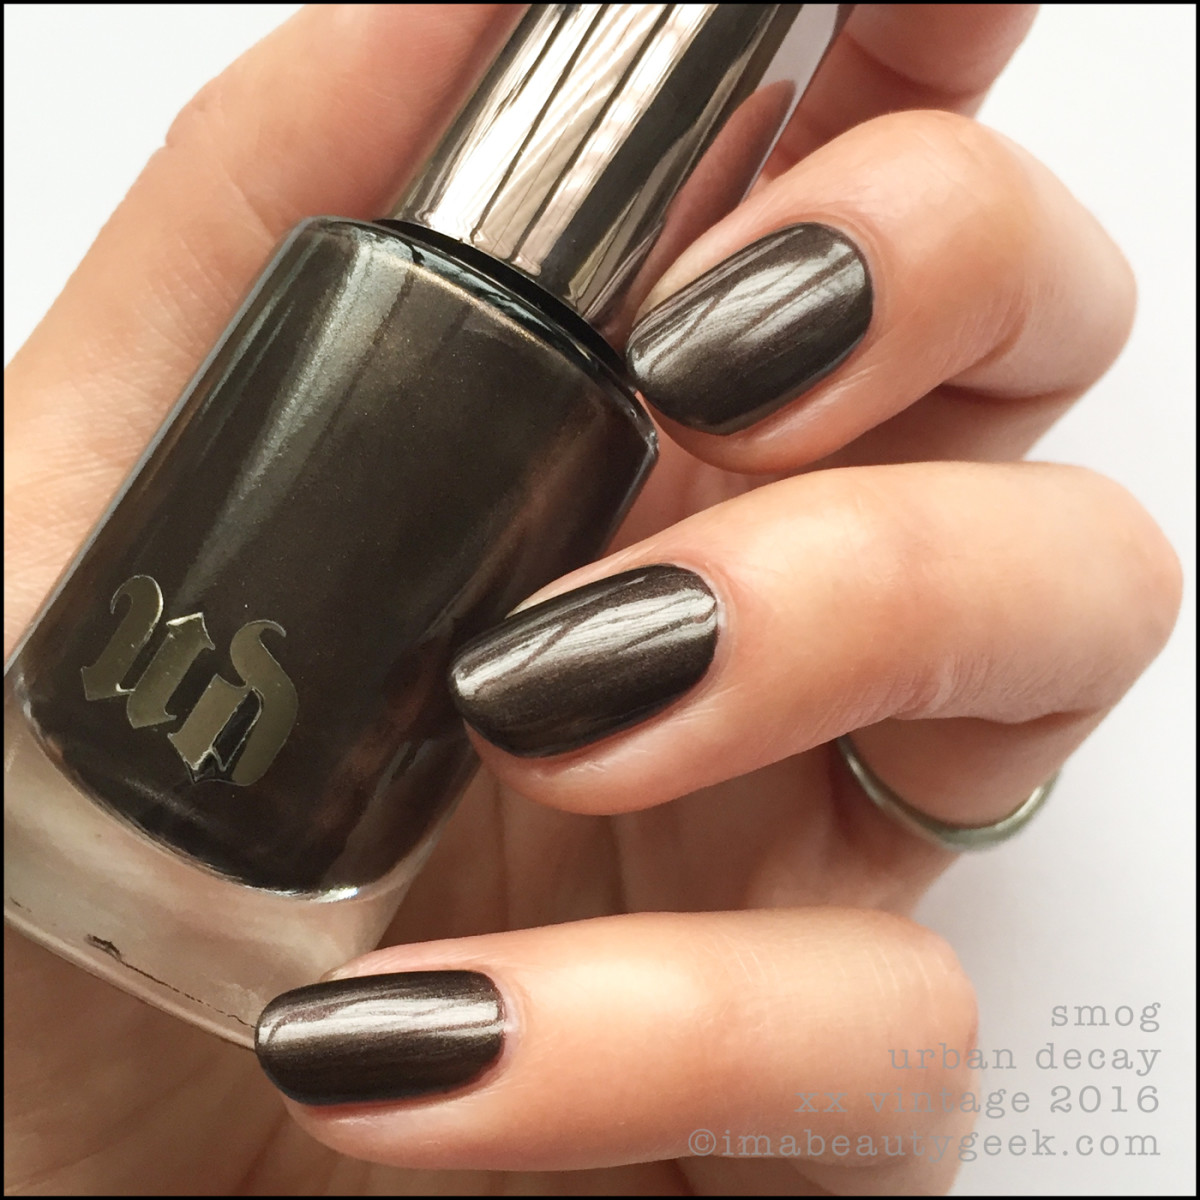 URBAN DECAY XX VINTAGE NAIL POLISH COLLECTION SWATCHES & REVIEW -  Beautygeeks